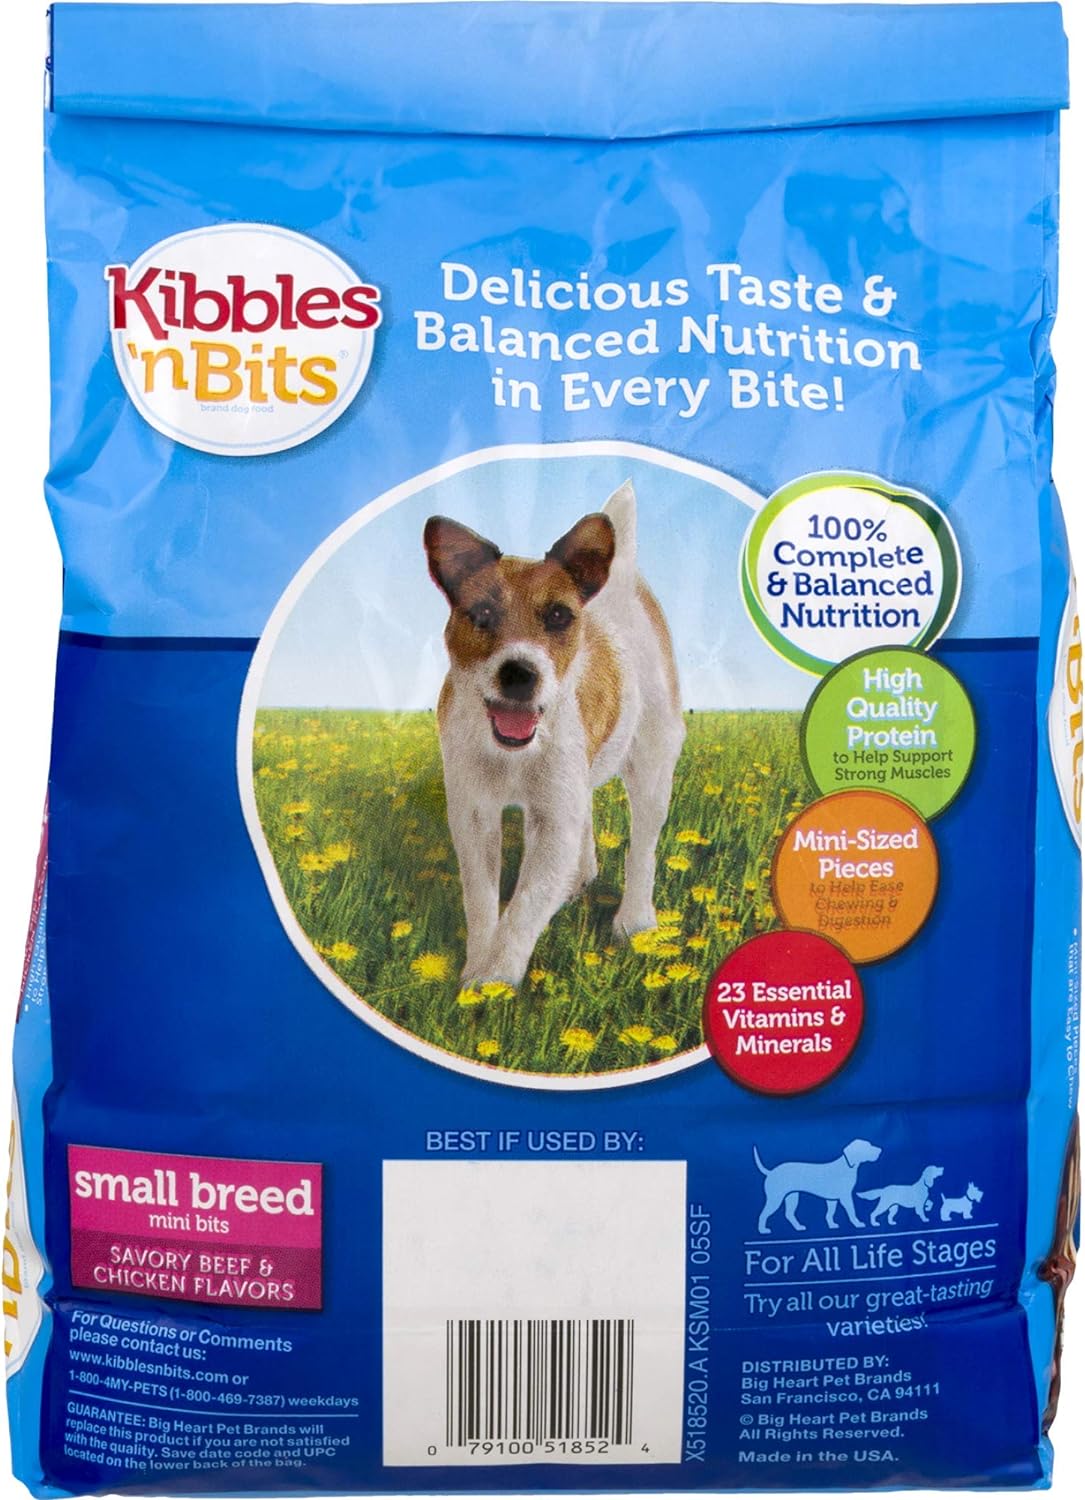 Kibbles n Bits Small Breed Mini Bits Savory Beef & Chicken Flavors Dry Dog Food – Gallery Image 3